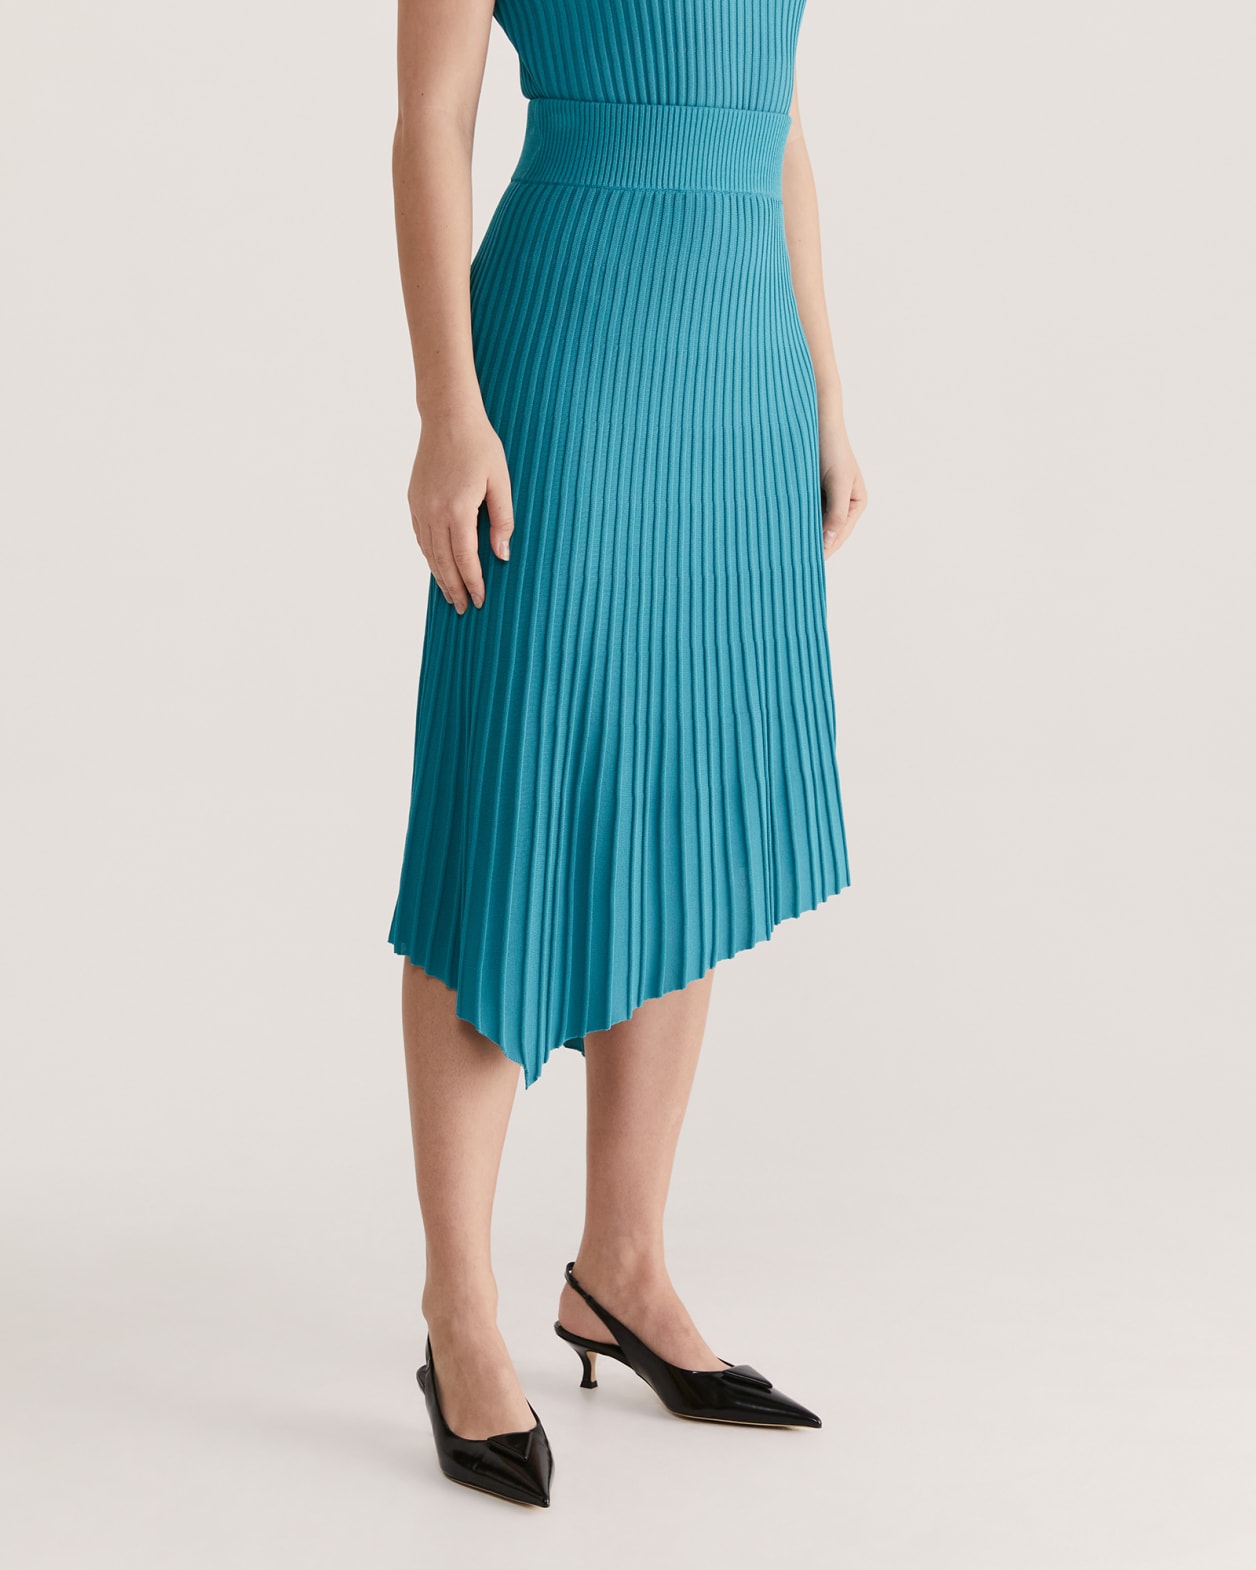 Ruby Pleated Knit Skirt in TURQUOISE